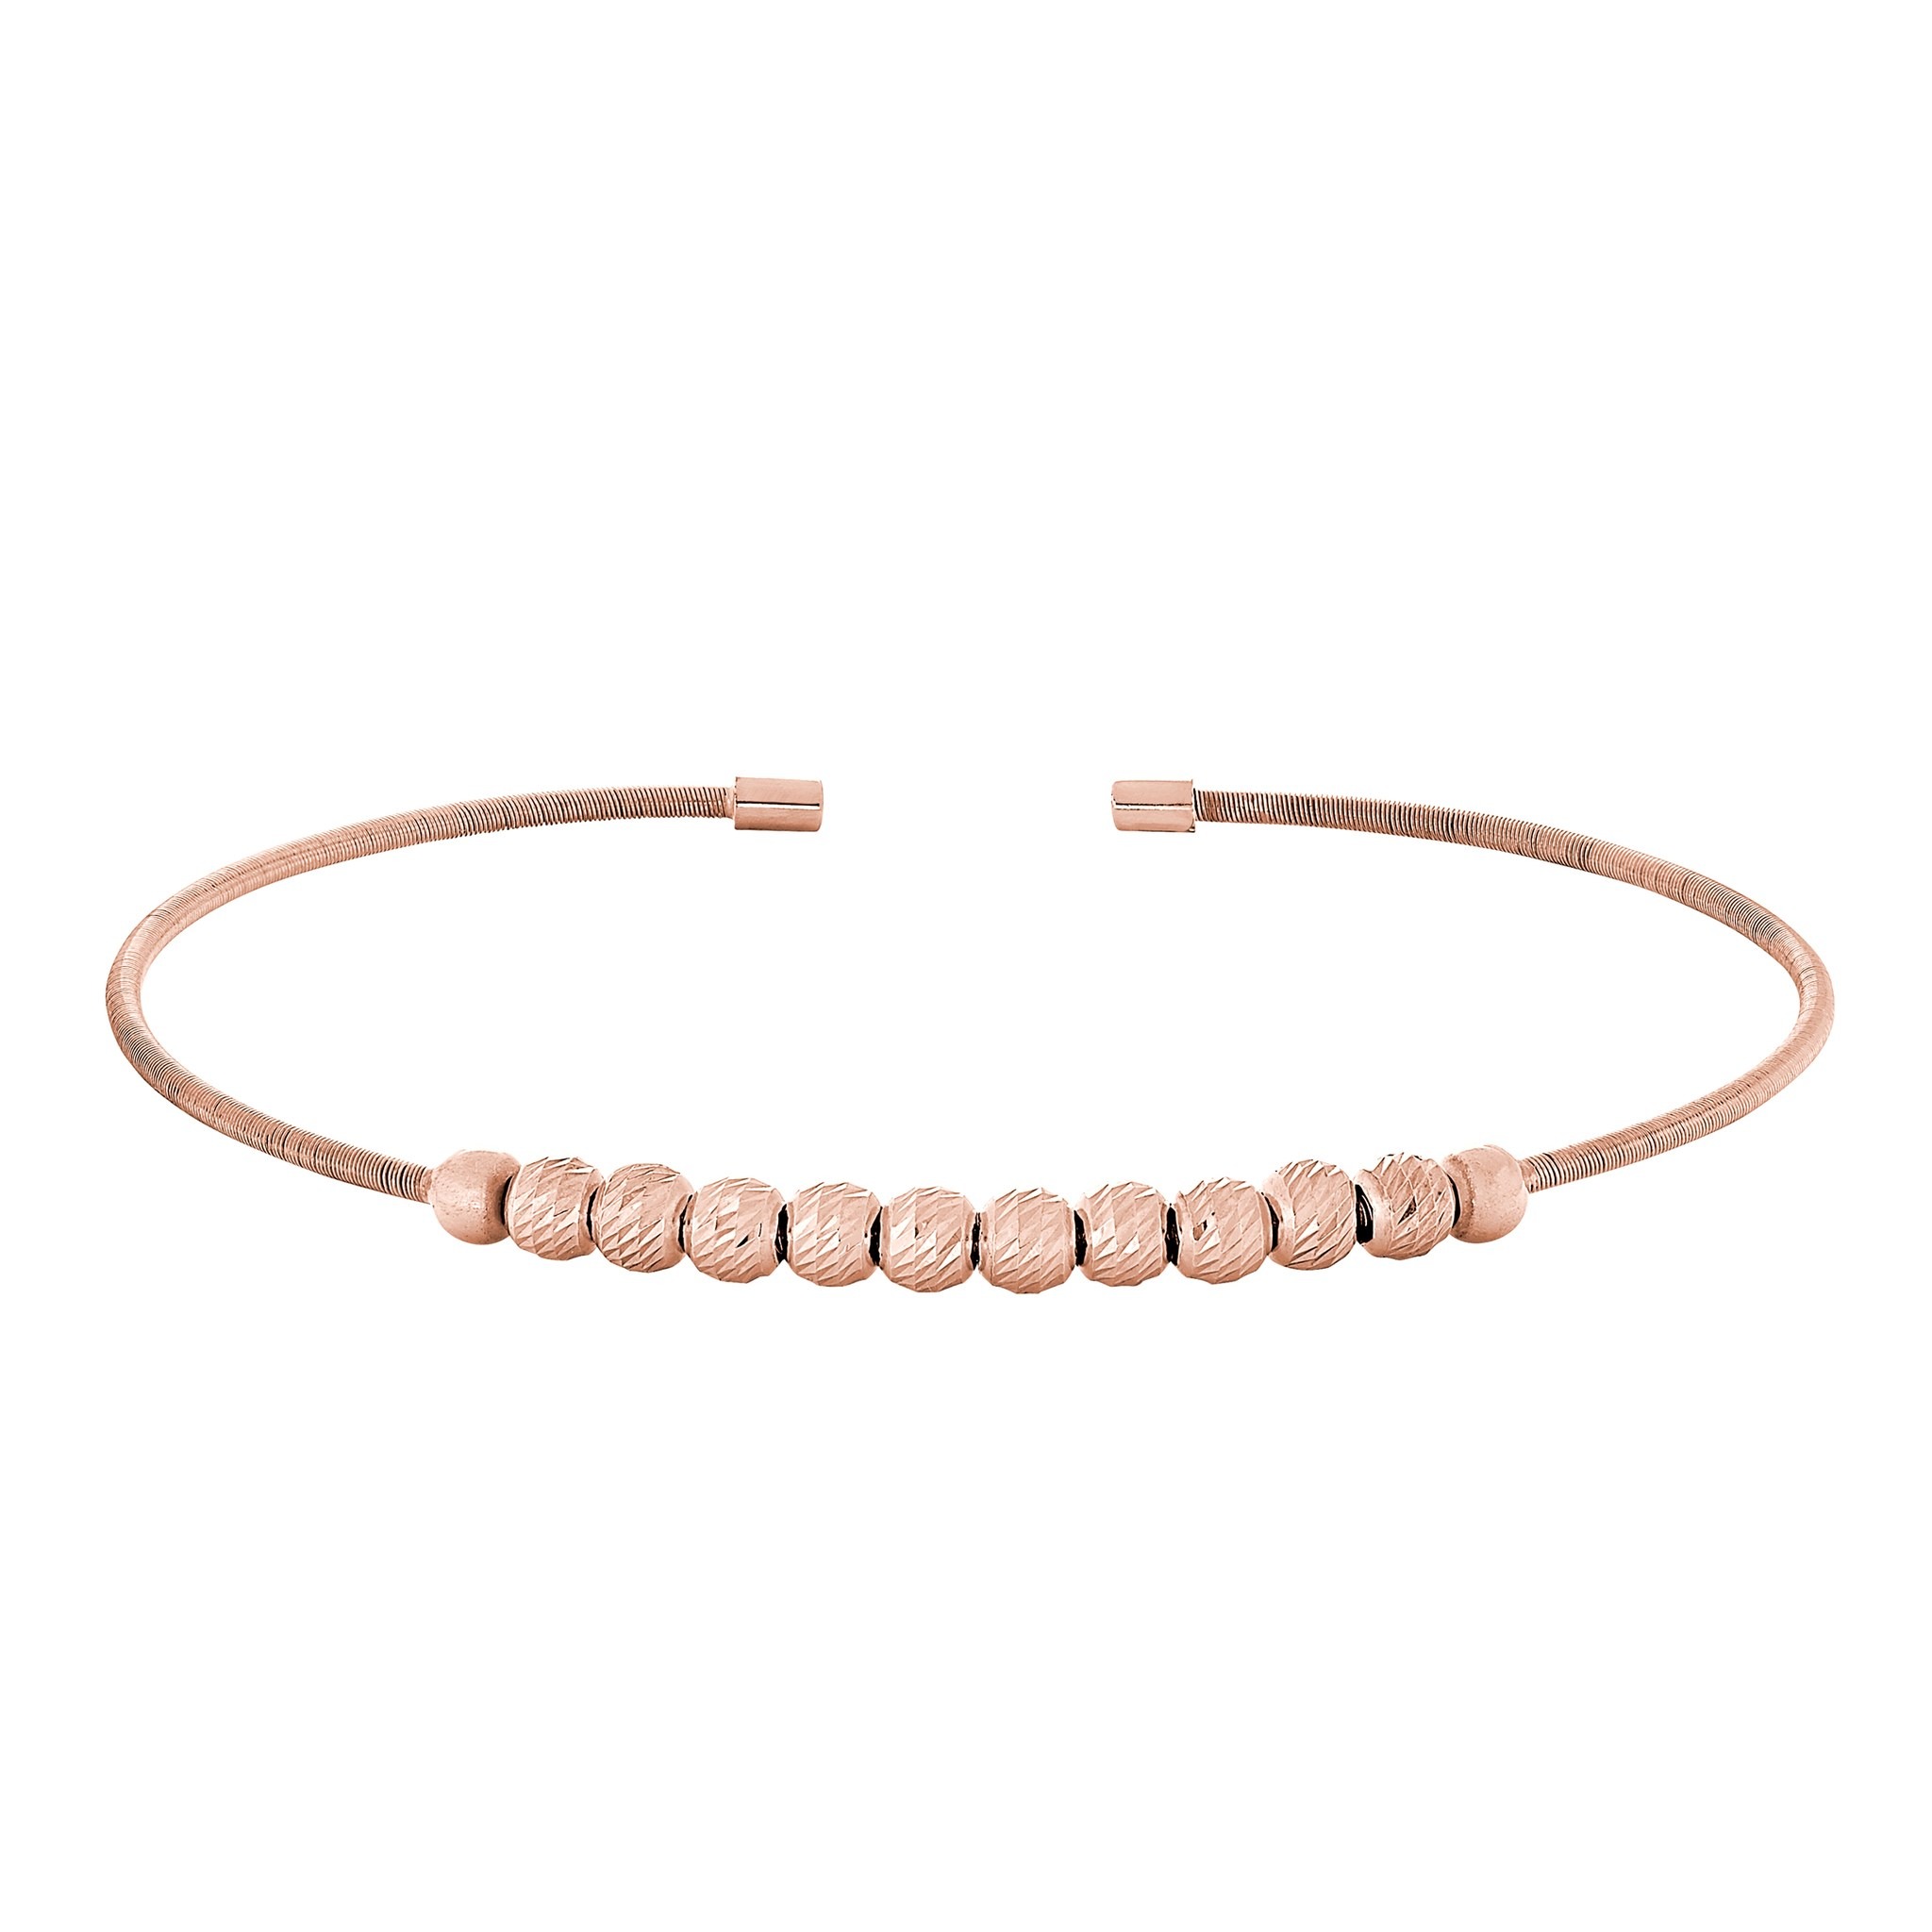 Rose Gold Finish Sterling Silver Cable Cuff Bracelet with Spinning Beads